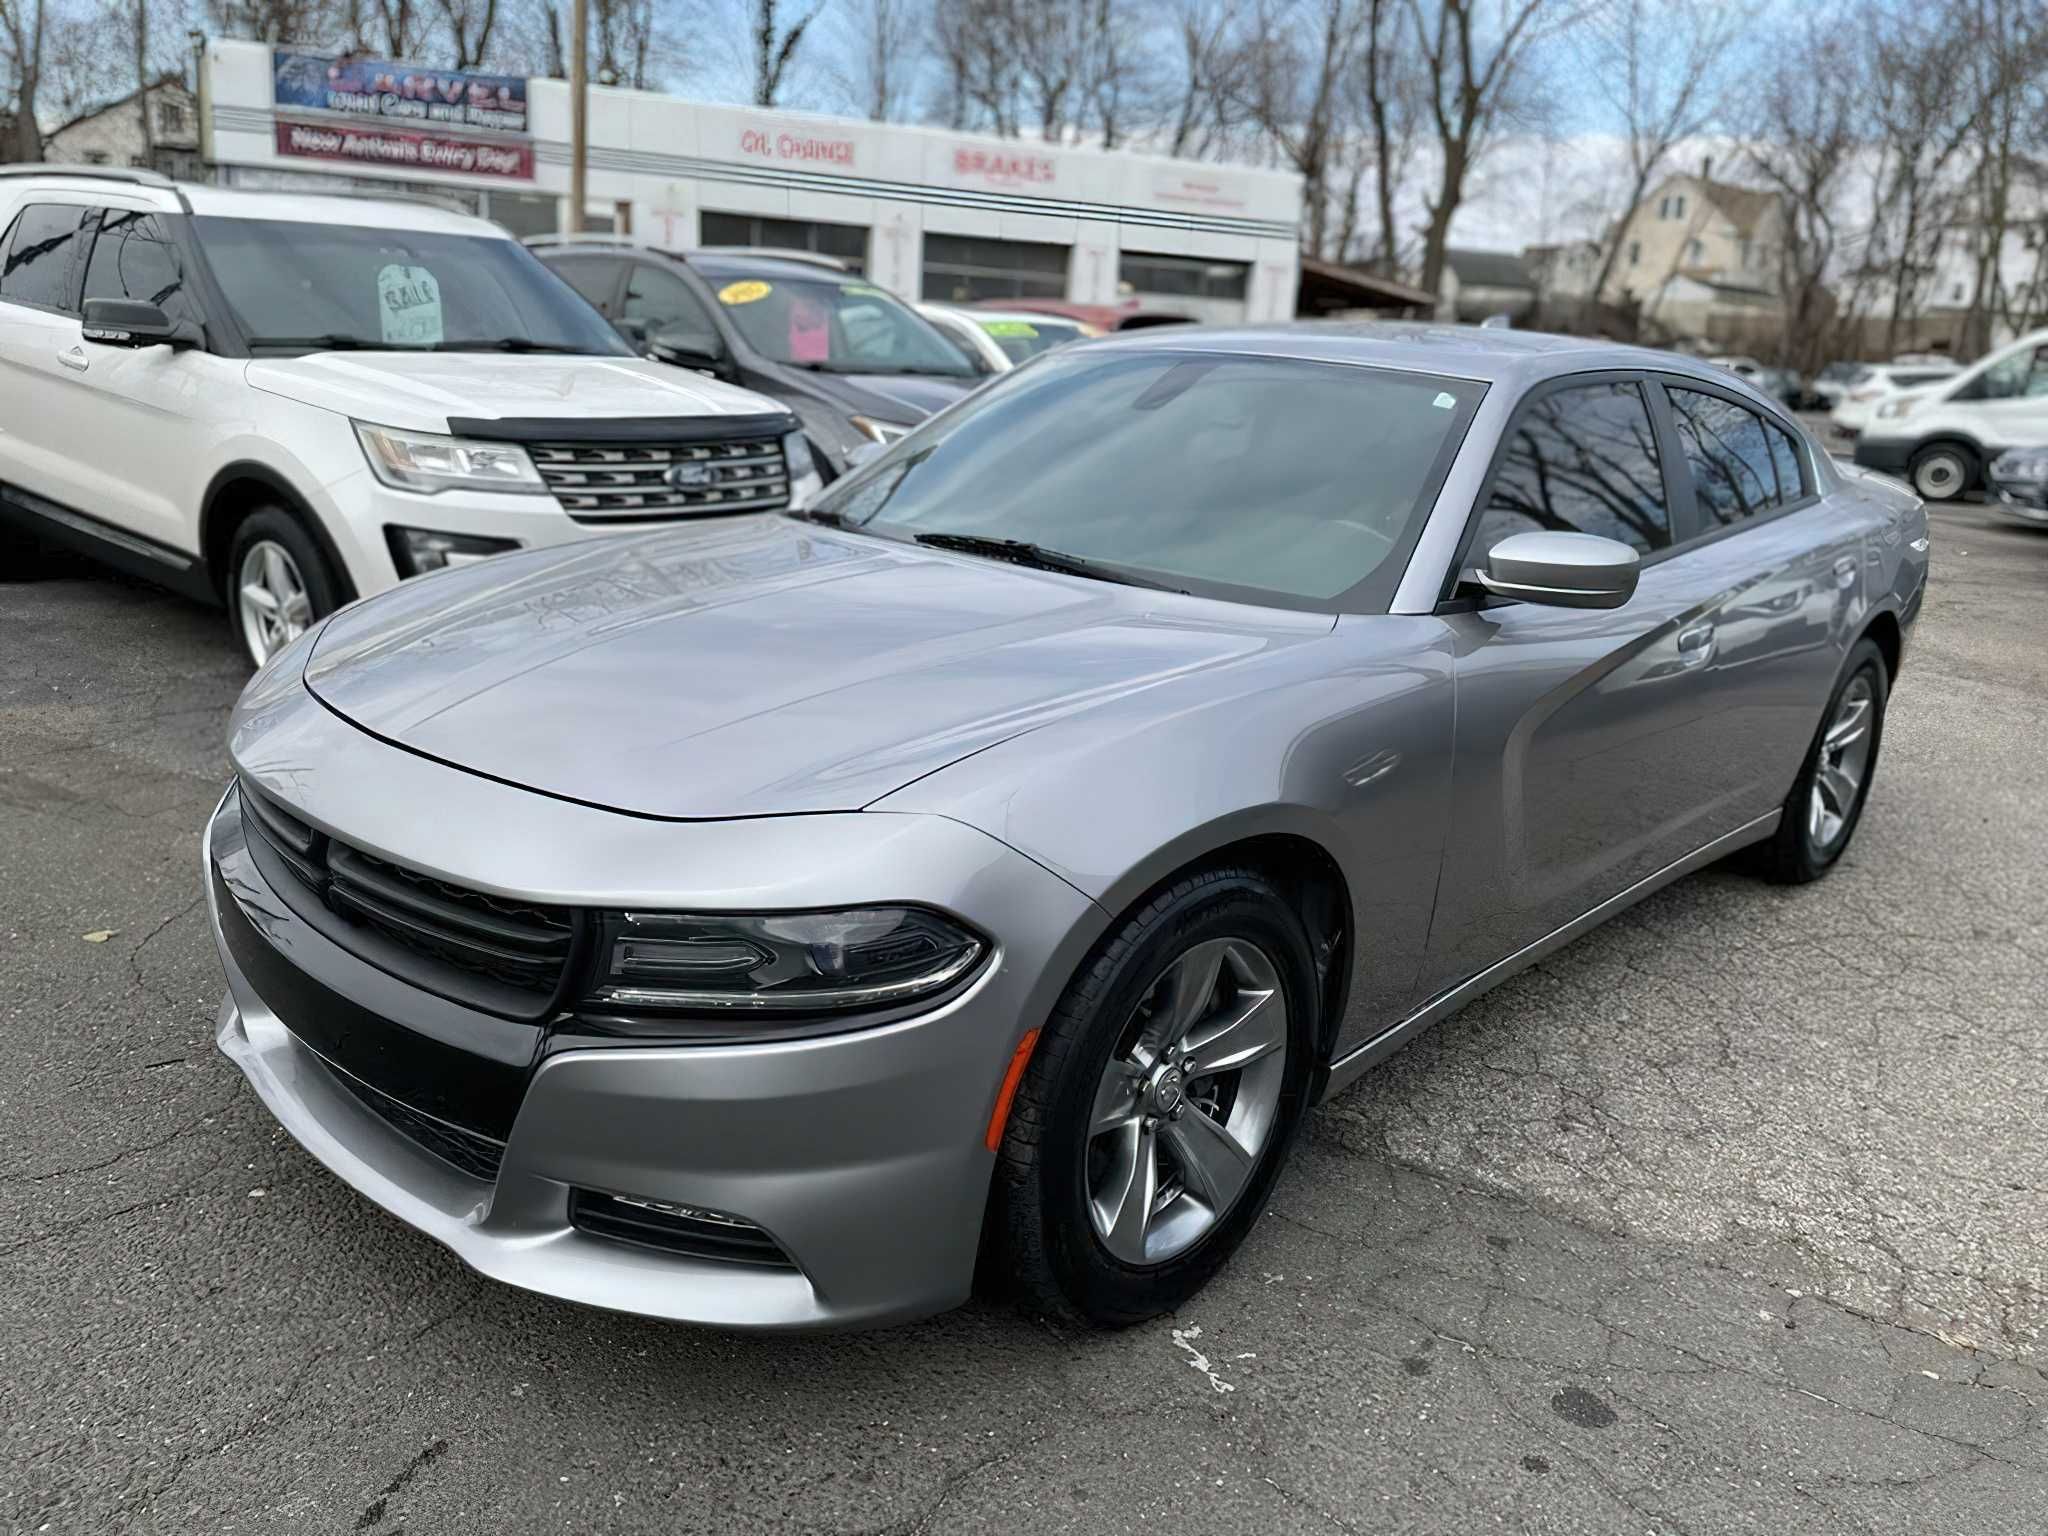 Dodge Charger 2018 R/T